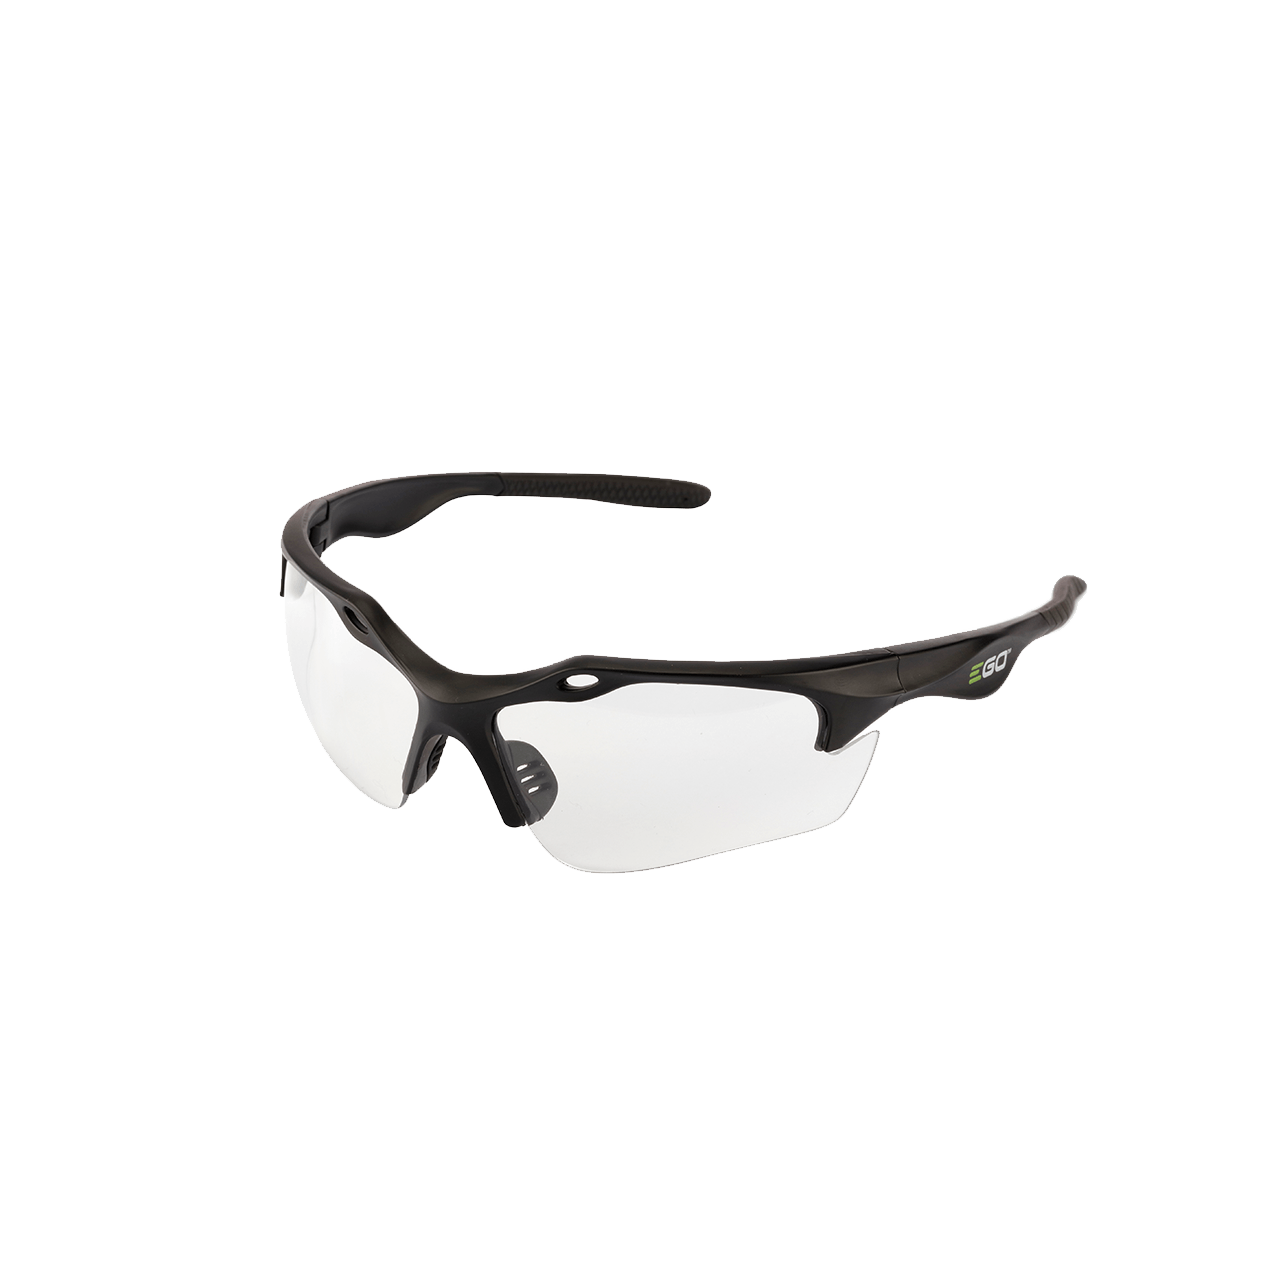 EGO GS001 SAFETY GLASSES - CLEAR